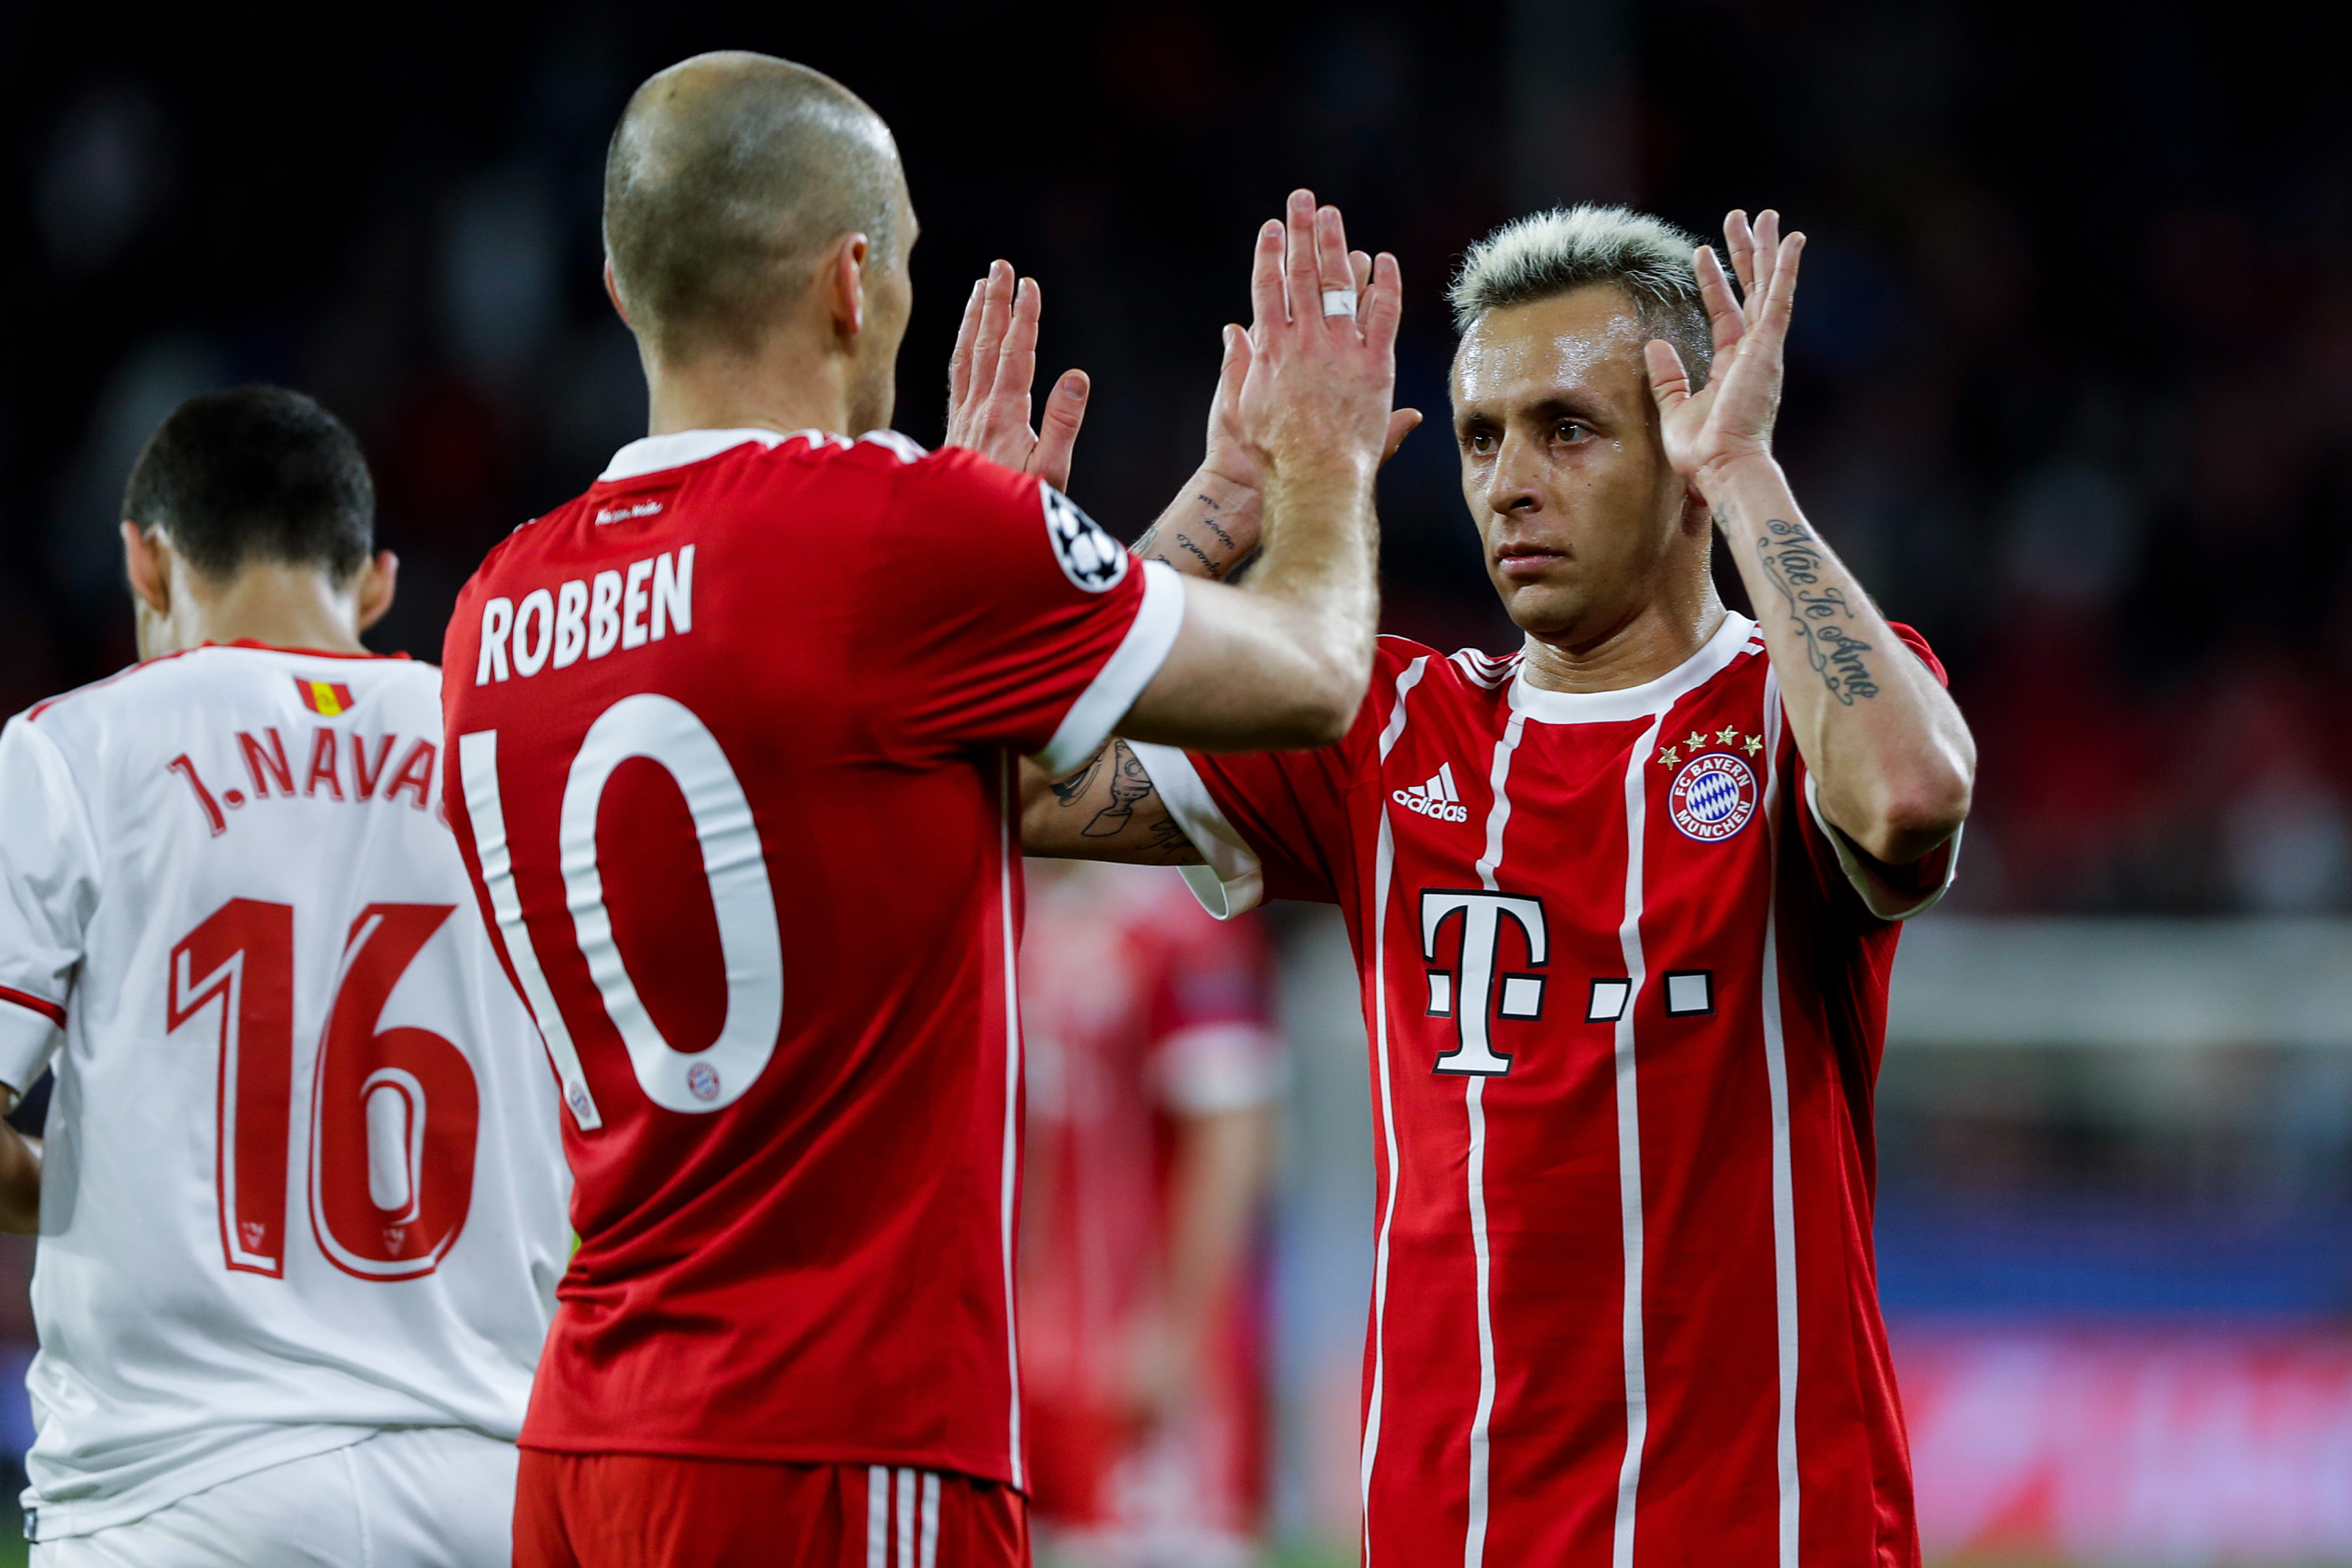 Arjen Robben and reflect on their time at Bayern Munich